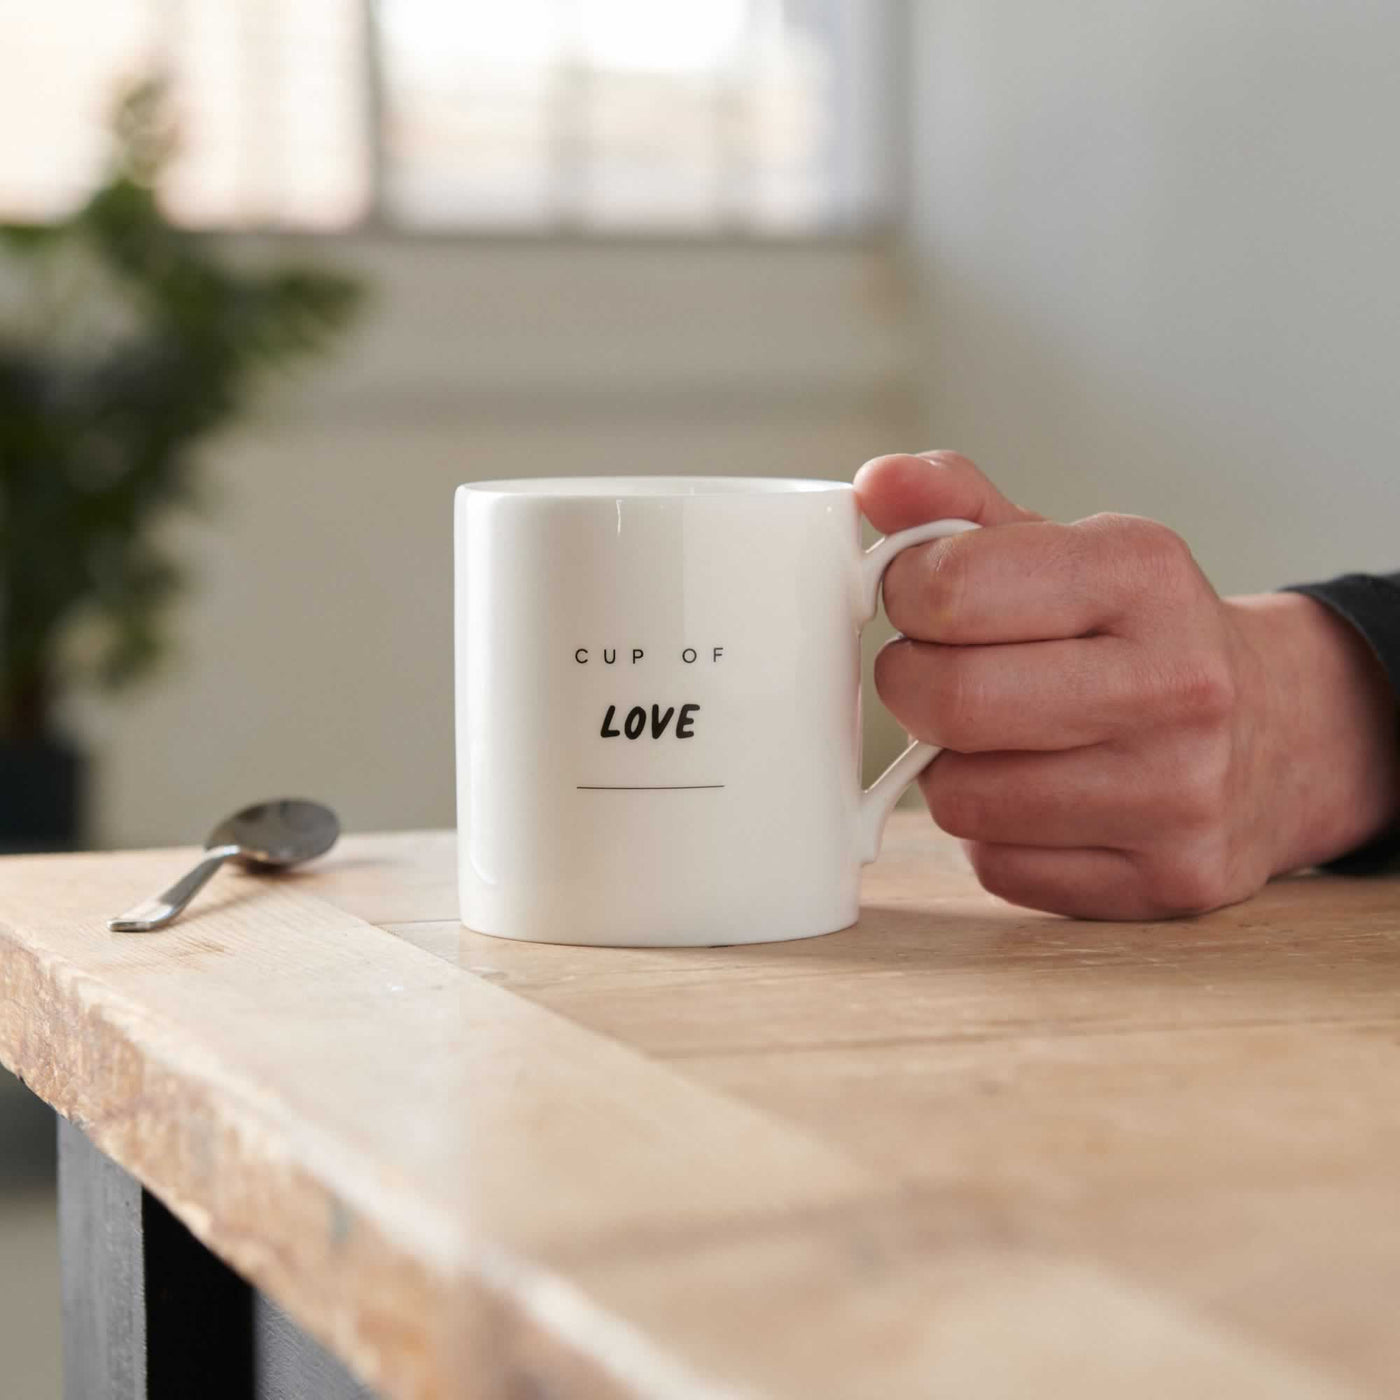 Cup of Love Mug on table with hand